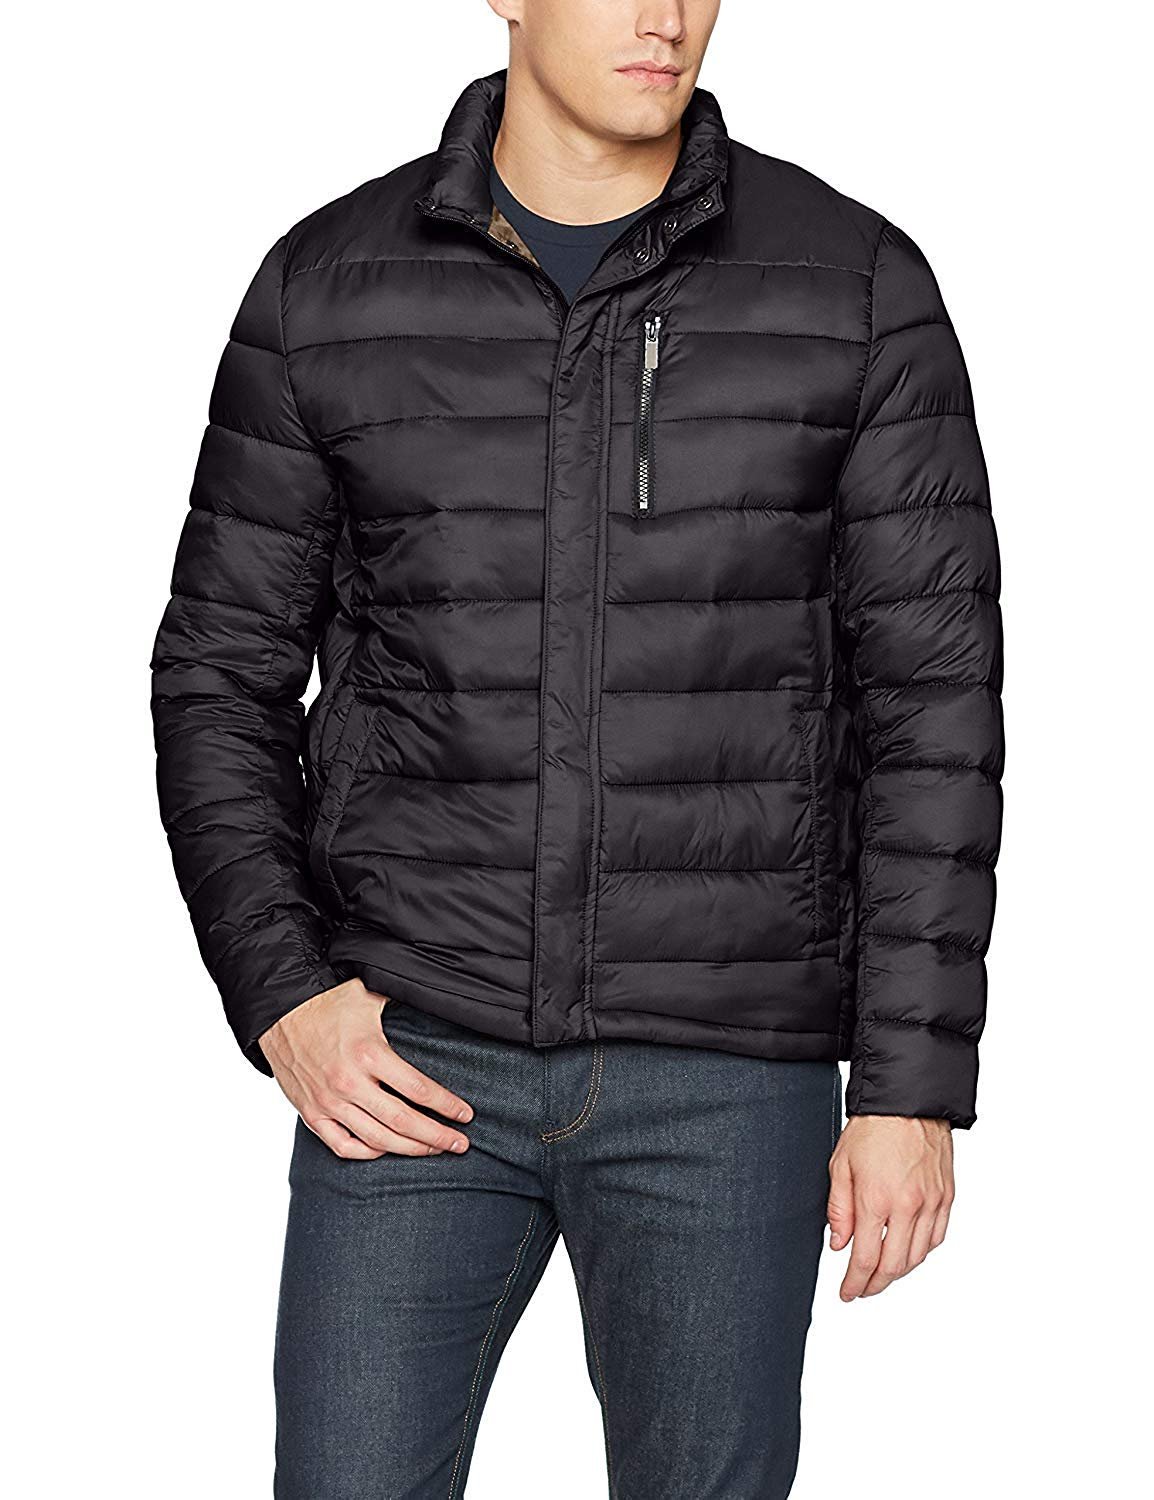 Kenneth Cole New York Men's Quilted Puffer Jacket | eBay